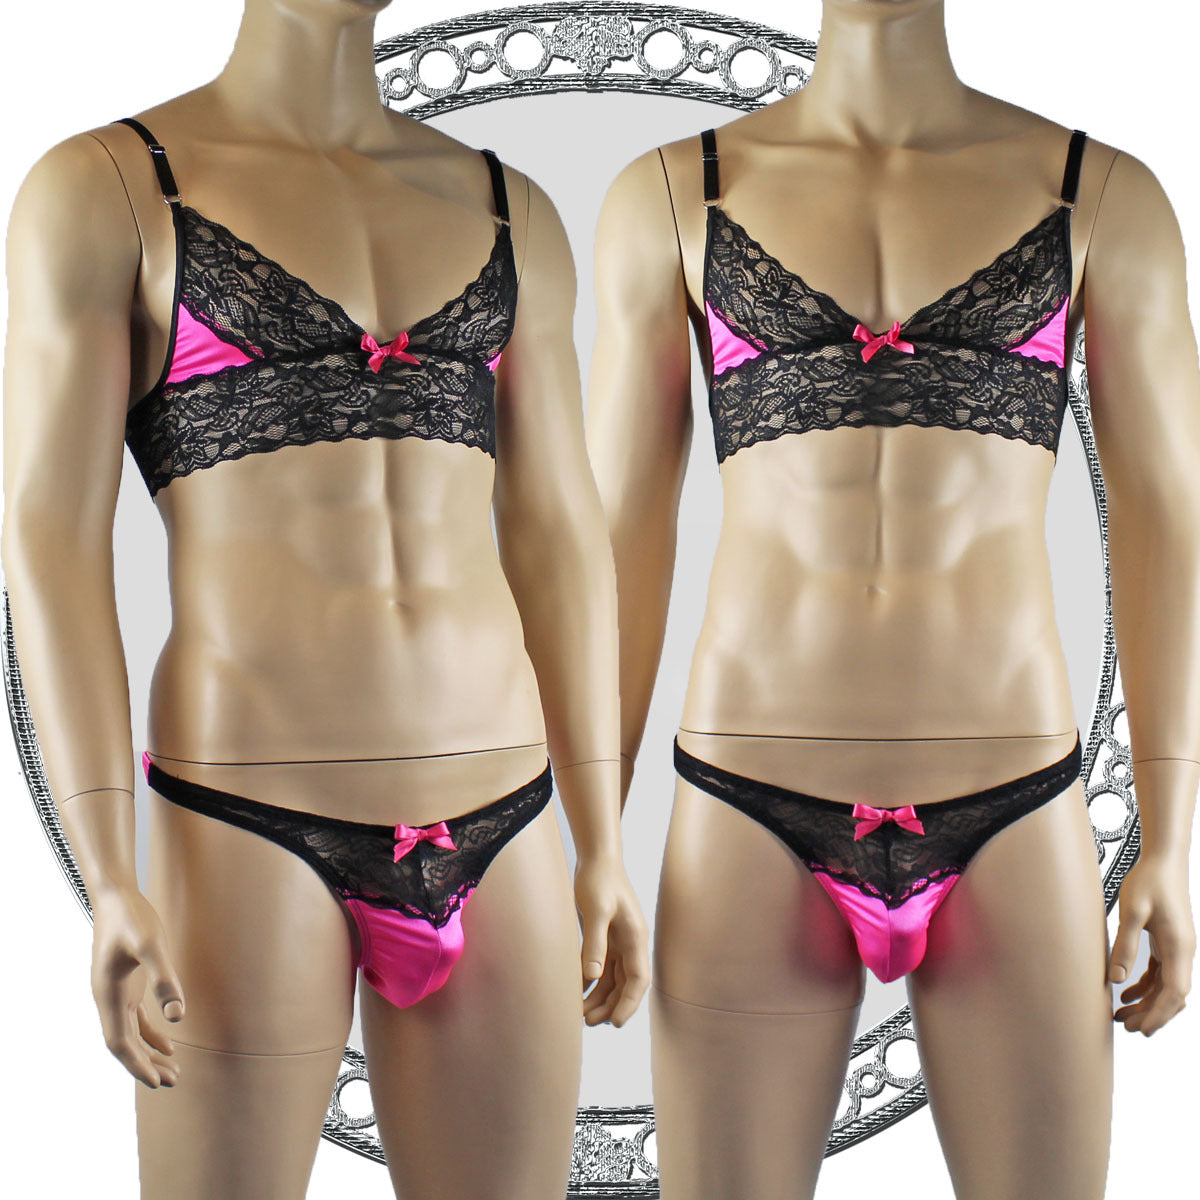 Mens Lace Bra Top Lingerie and Thong for Men Hot Pink and Black